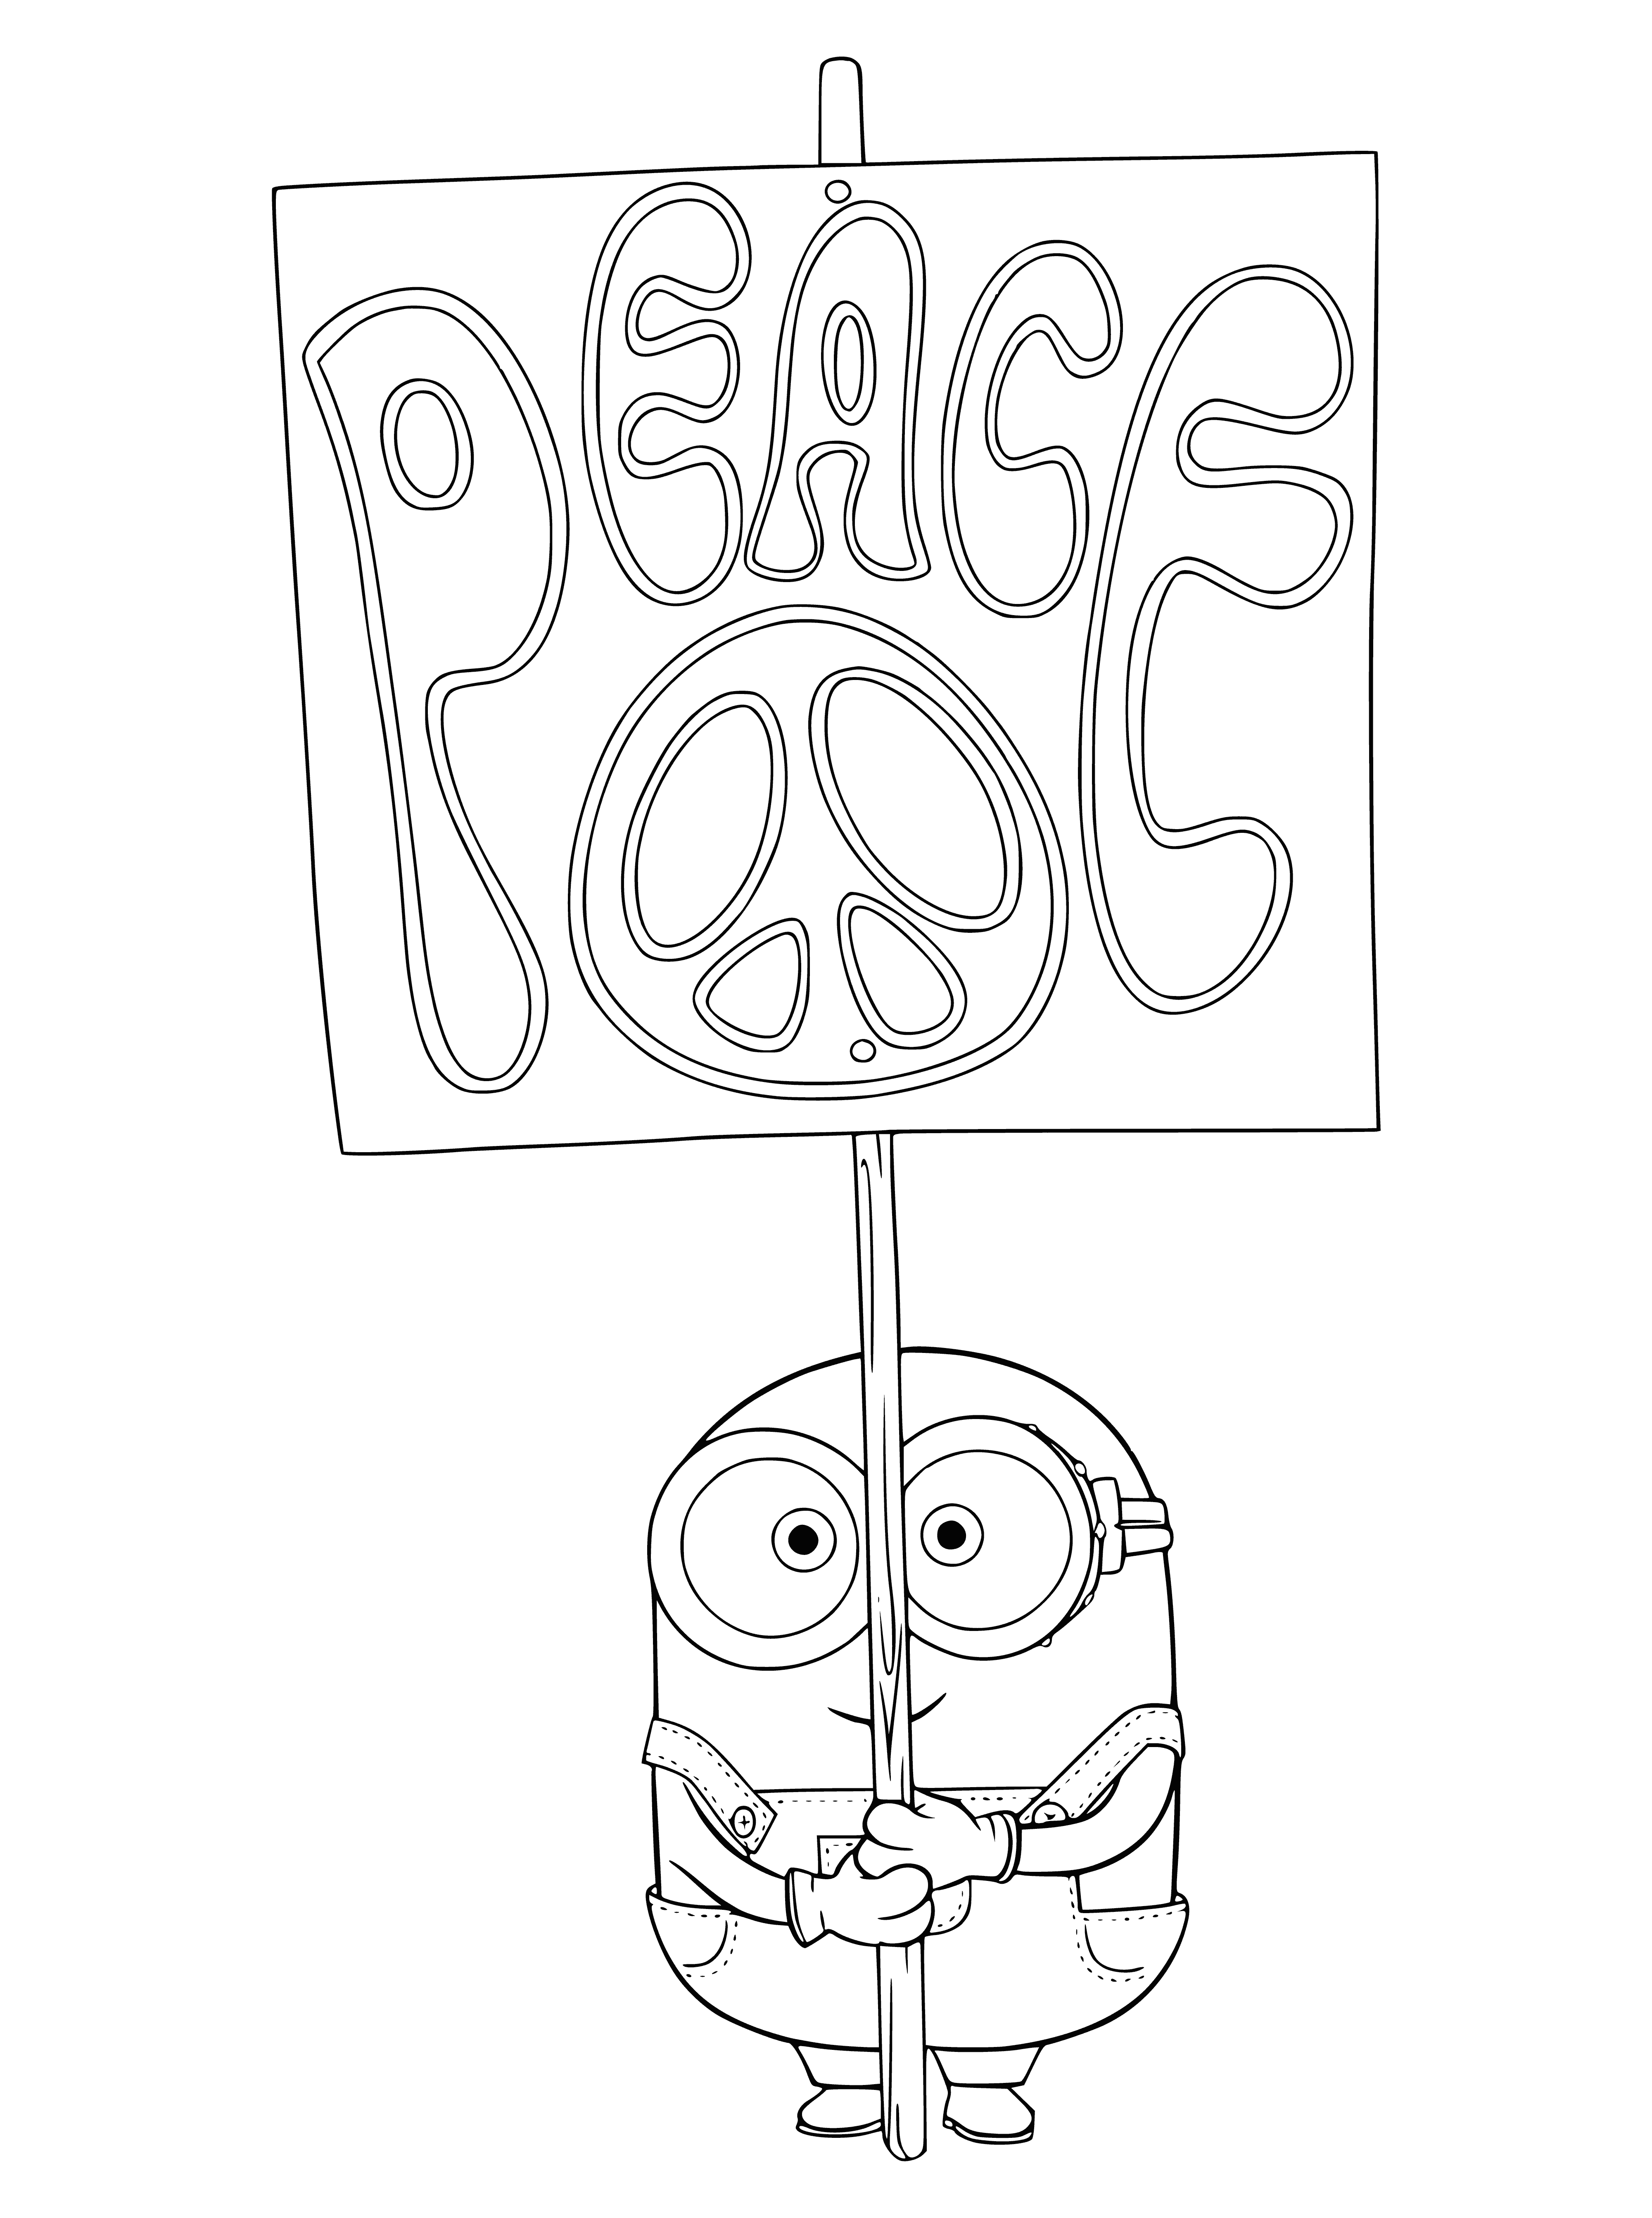 coloring page: Cute, yellow Minions from Despicable Me—holding a sign that reads “Mignon”—are sure to bring a smile to your face!